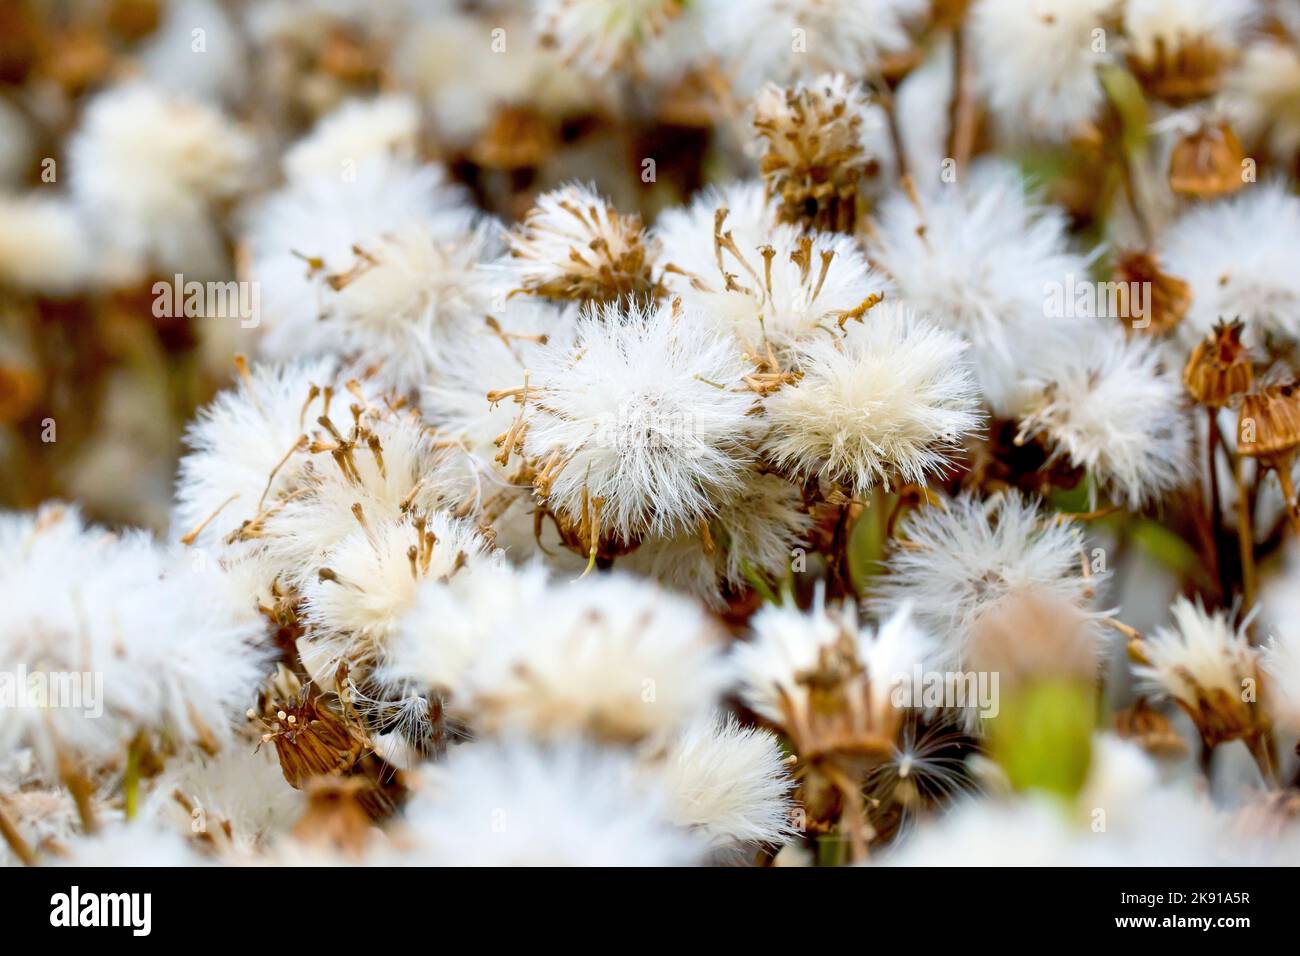 Common Ragwort (senecio jacobaea), close up showing the plant in seed, with each flowerhead producing a cluster of fluffy, feathery seeds. Stock Photo